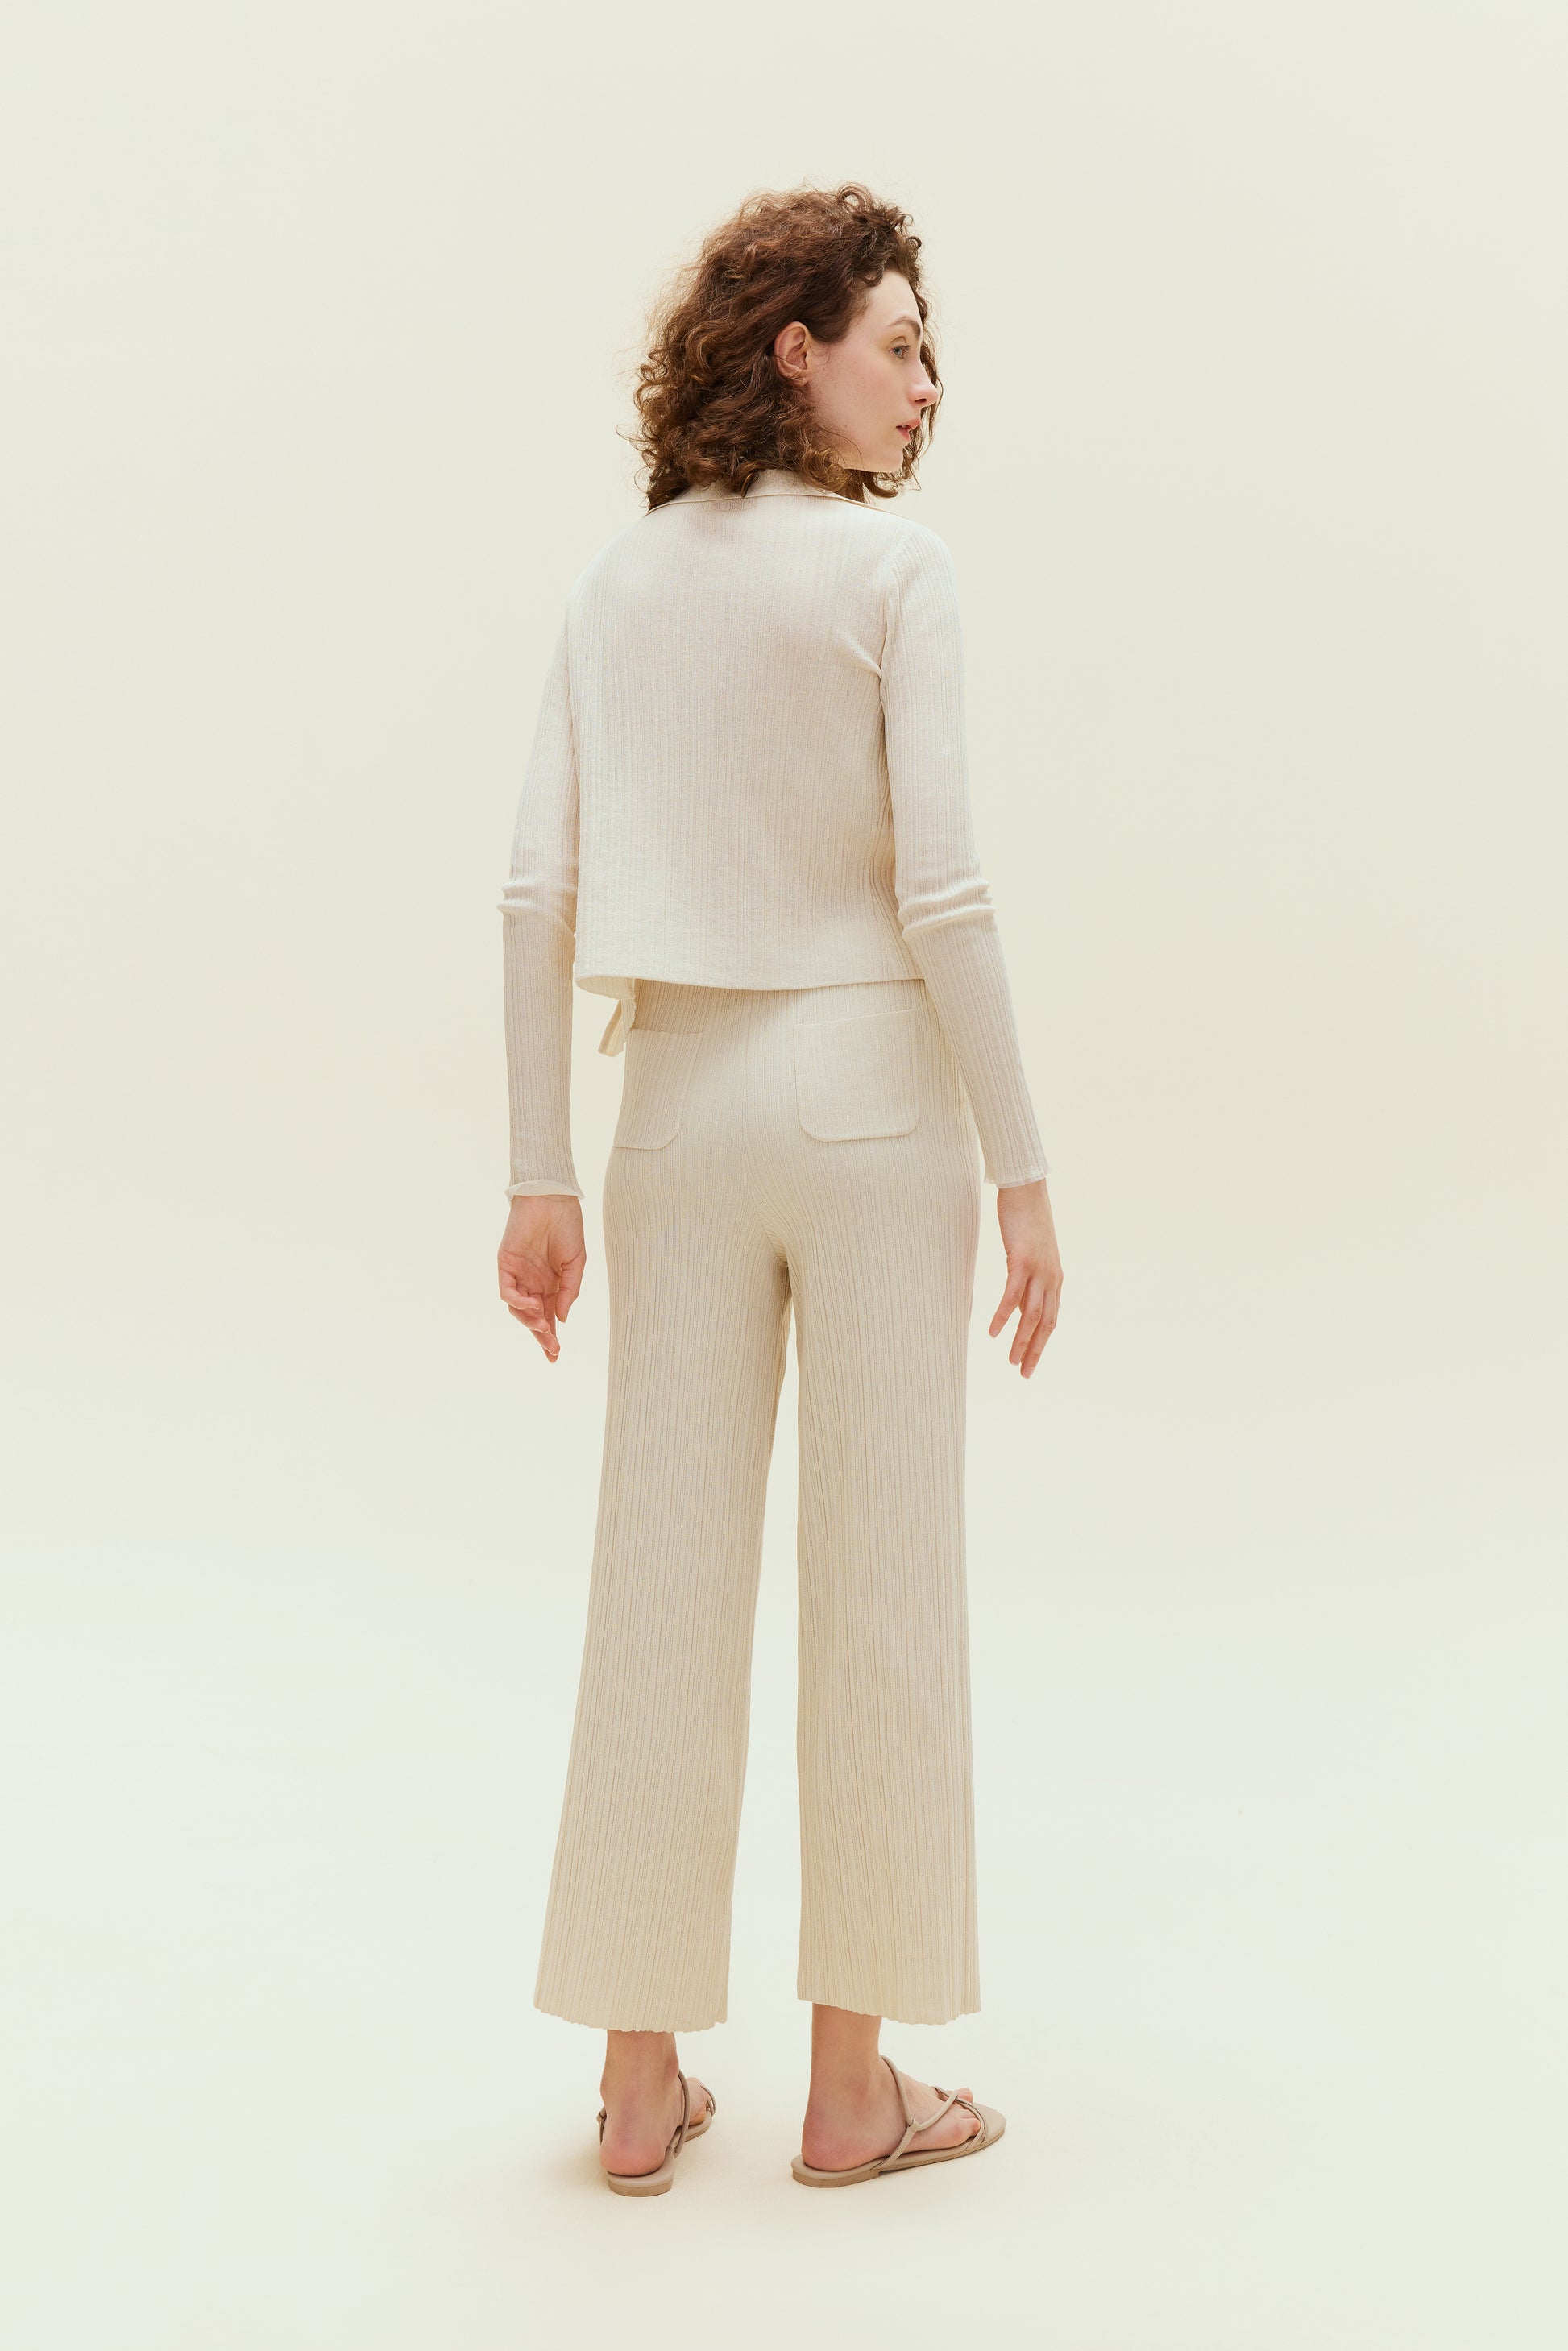 Back view of woman standing wearing off white knit pants with pockets with white knit cardigan